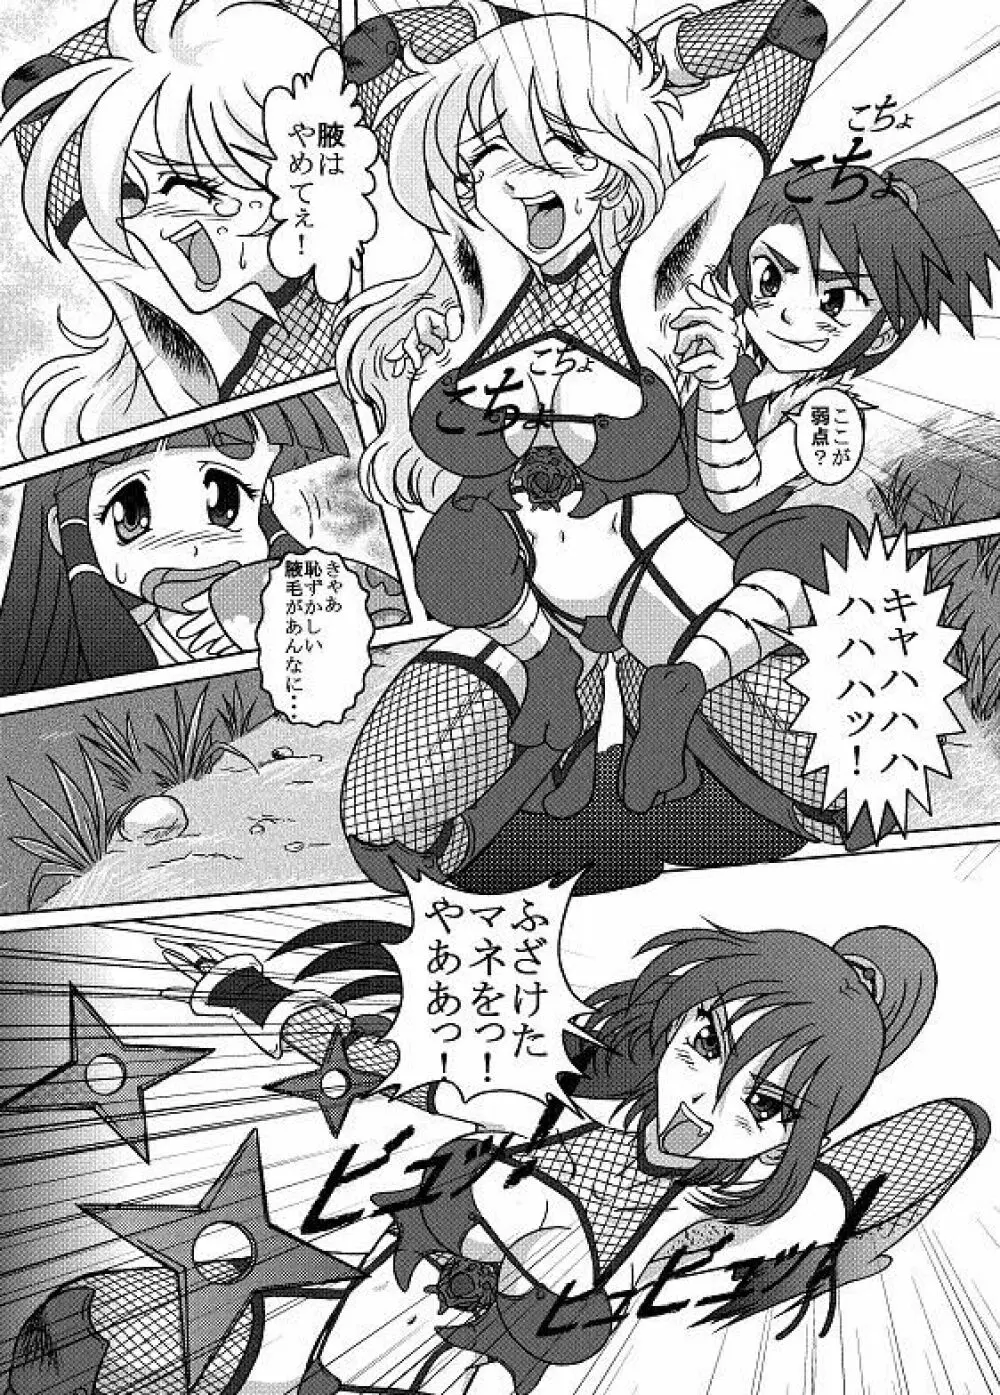 Same-themed manga about kid fighting female ninjas from japanese imageboard. Page.38